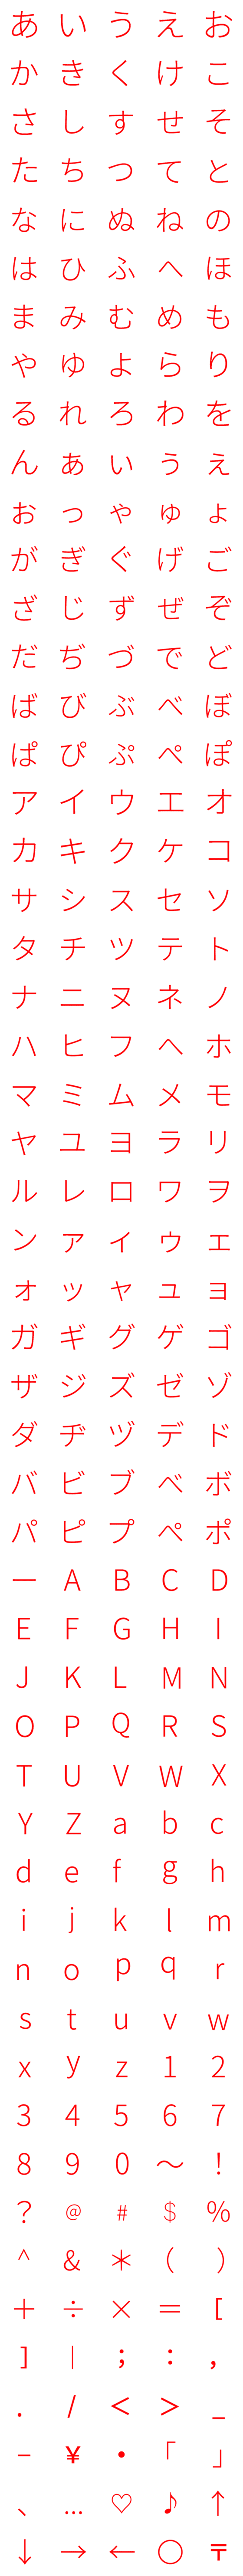 [LINE絵文字]普通に赤い文字の画像一覧